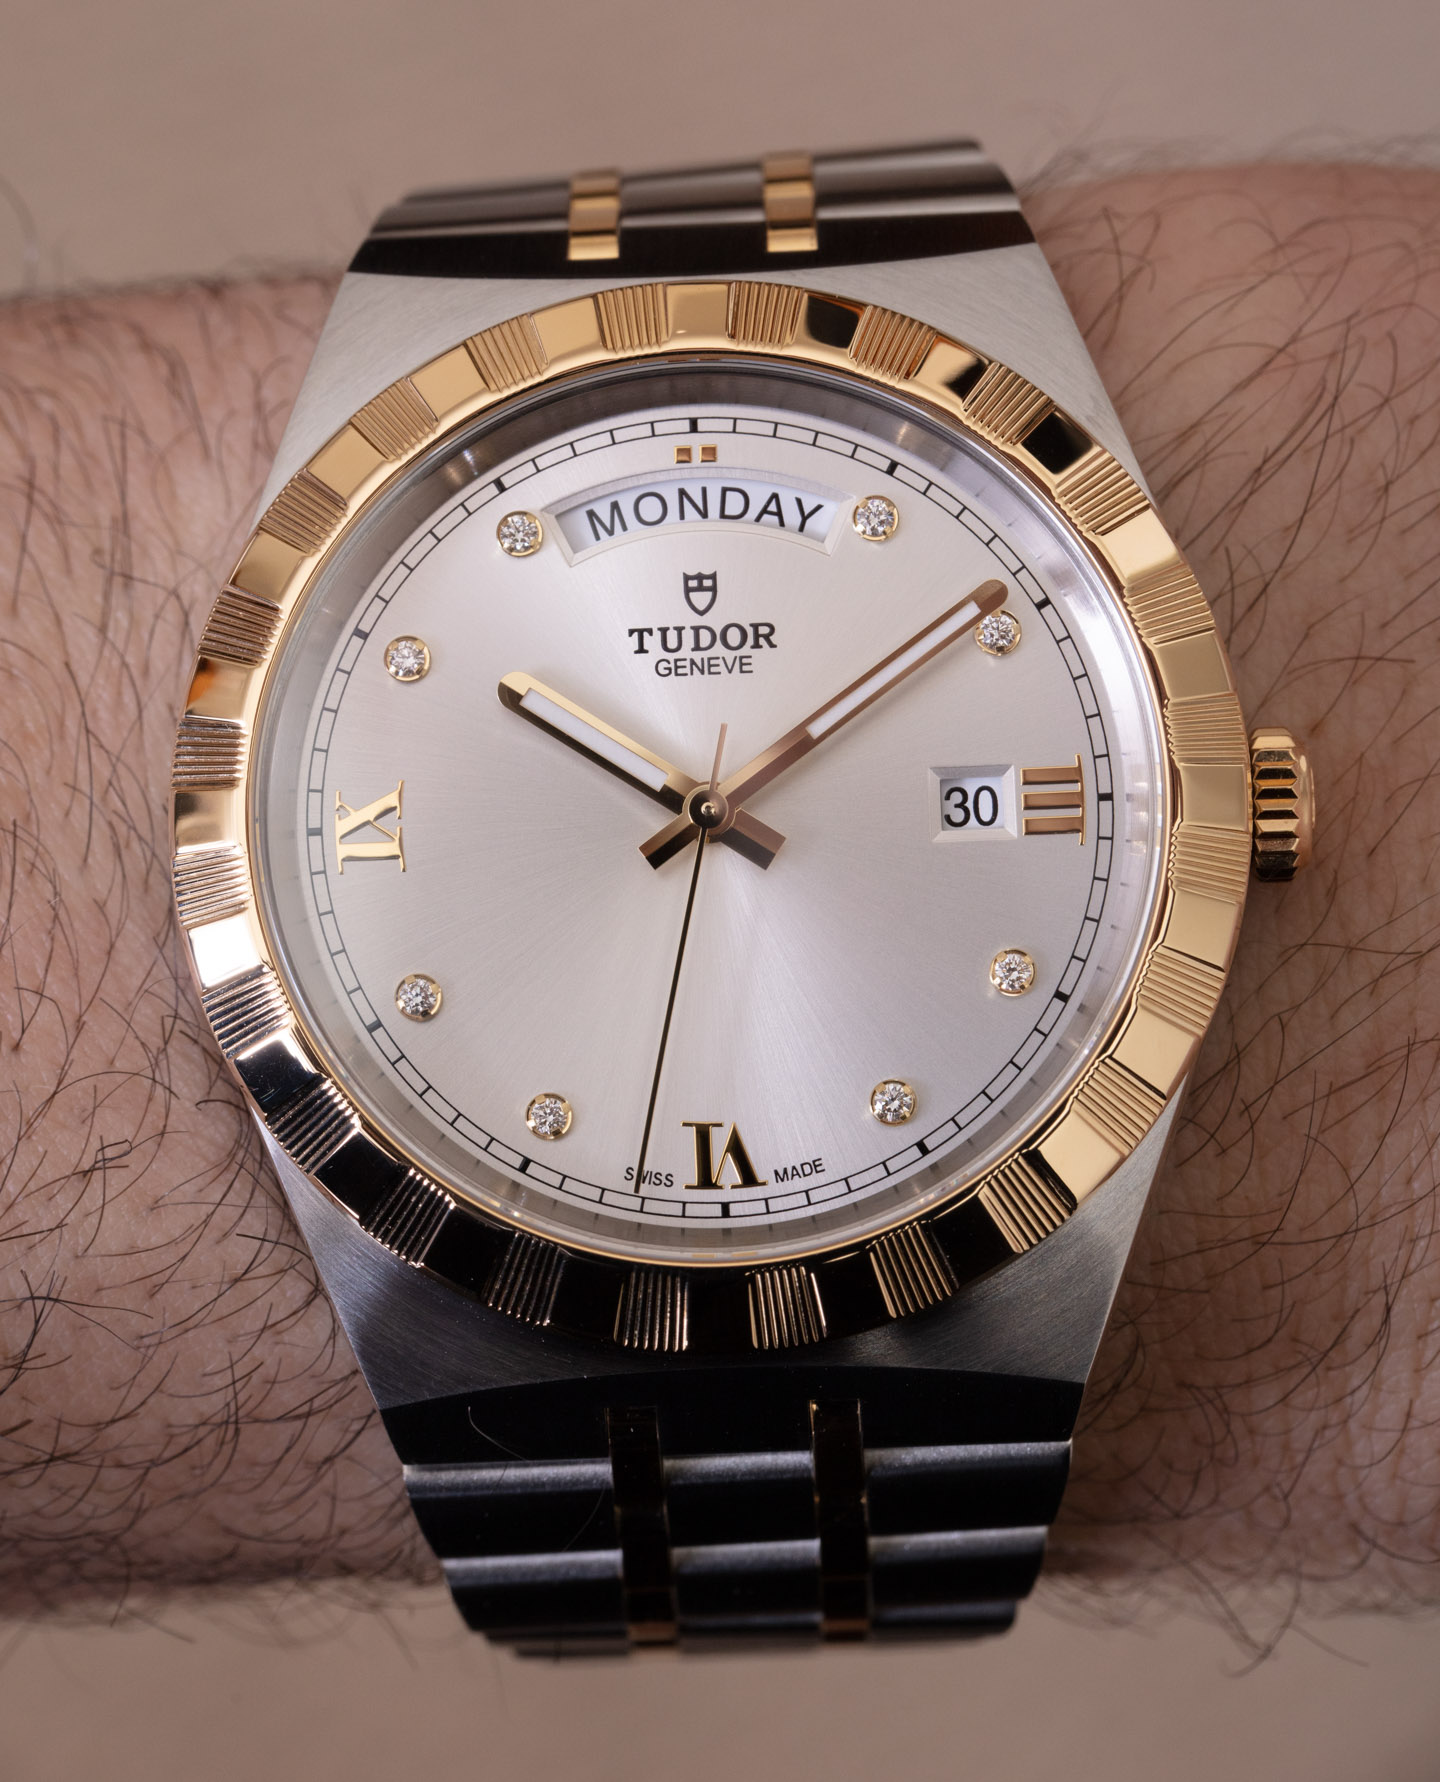 Value Proposition Review - Rumoe Nobel Royal Watch - Monochrome Watches